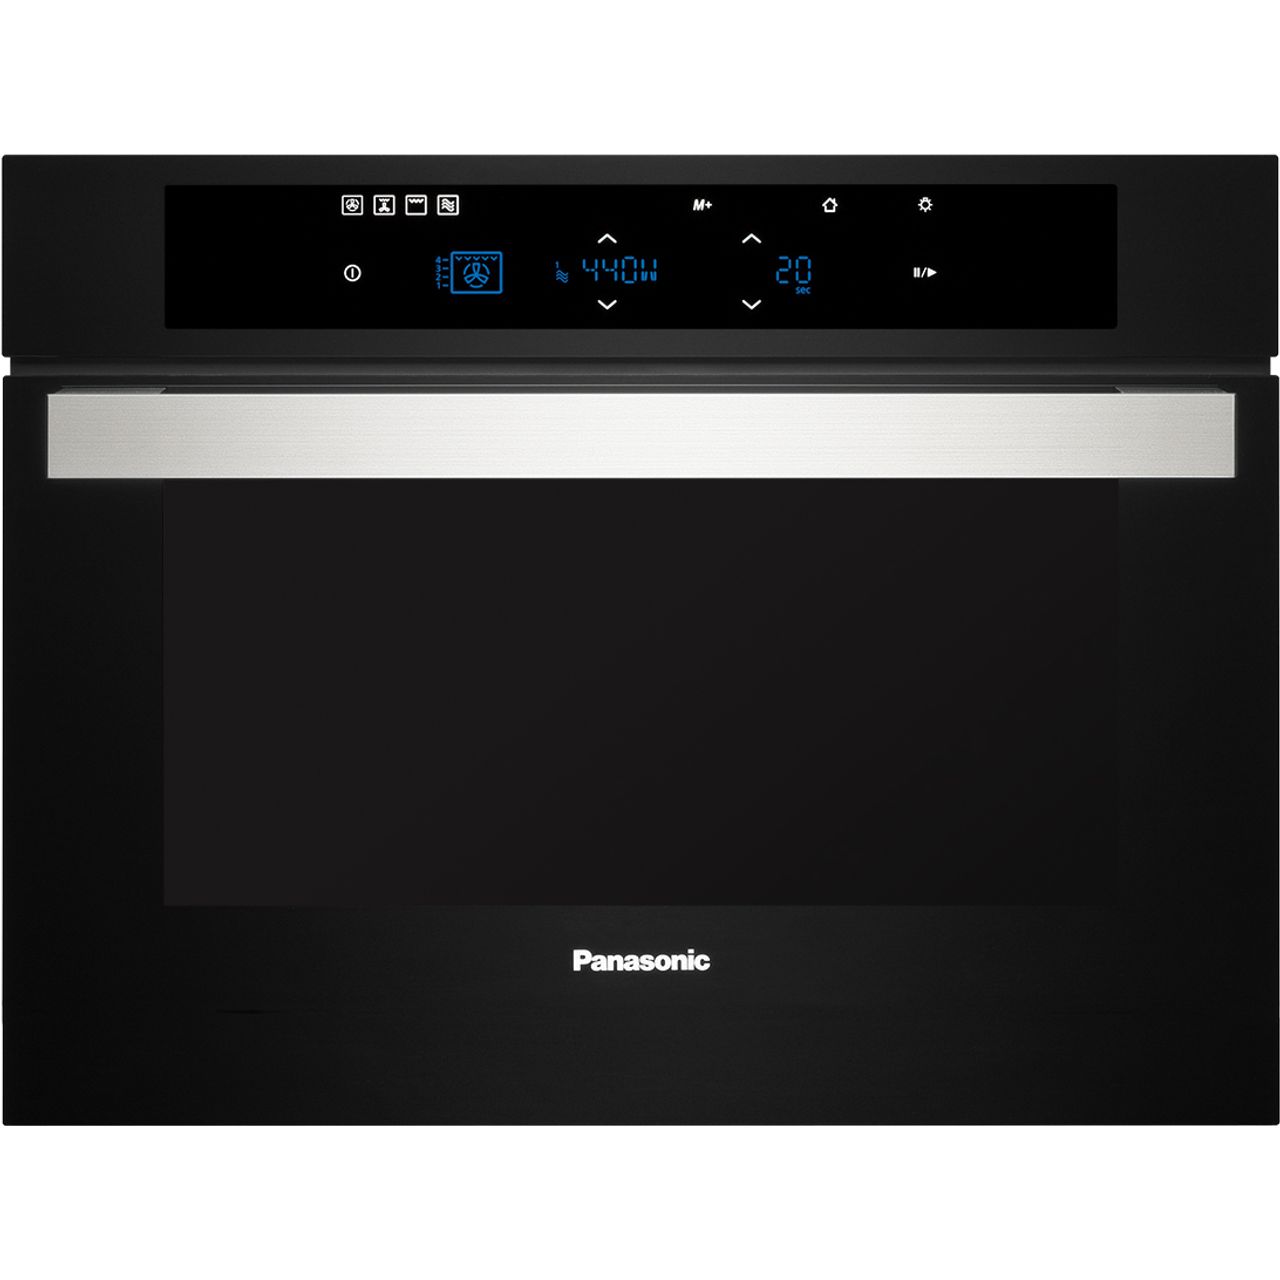 Panasonic HL-MX465BBTQ Built In Combination Microwave Oven Review